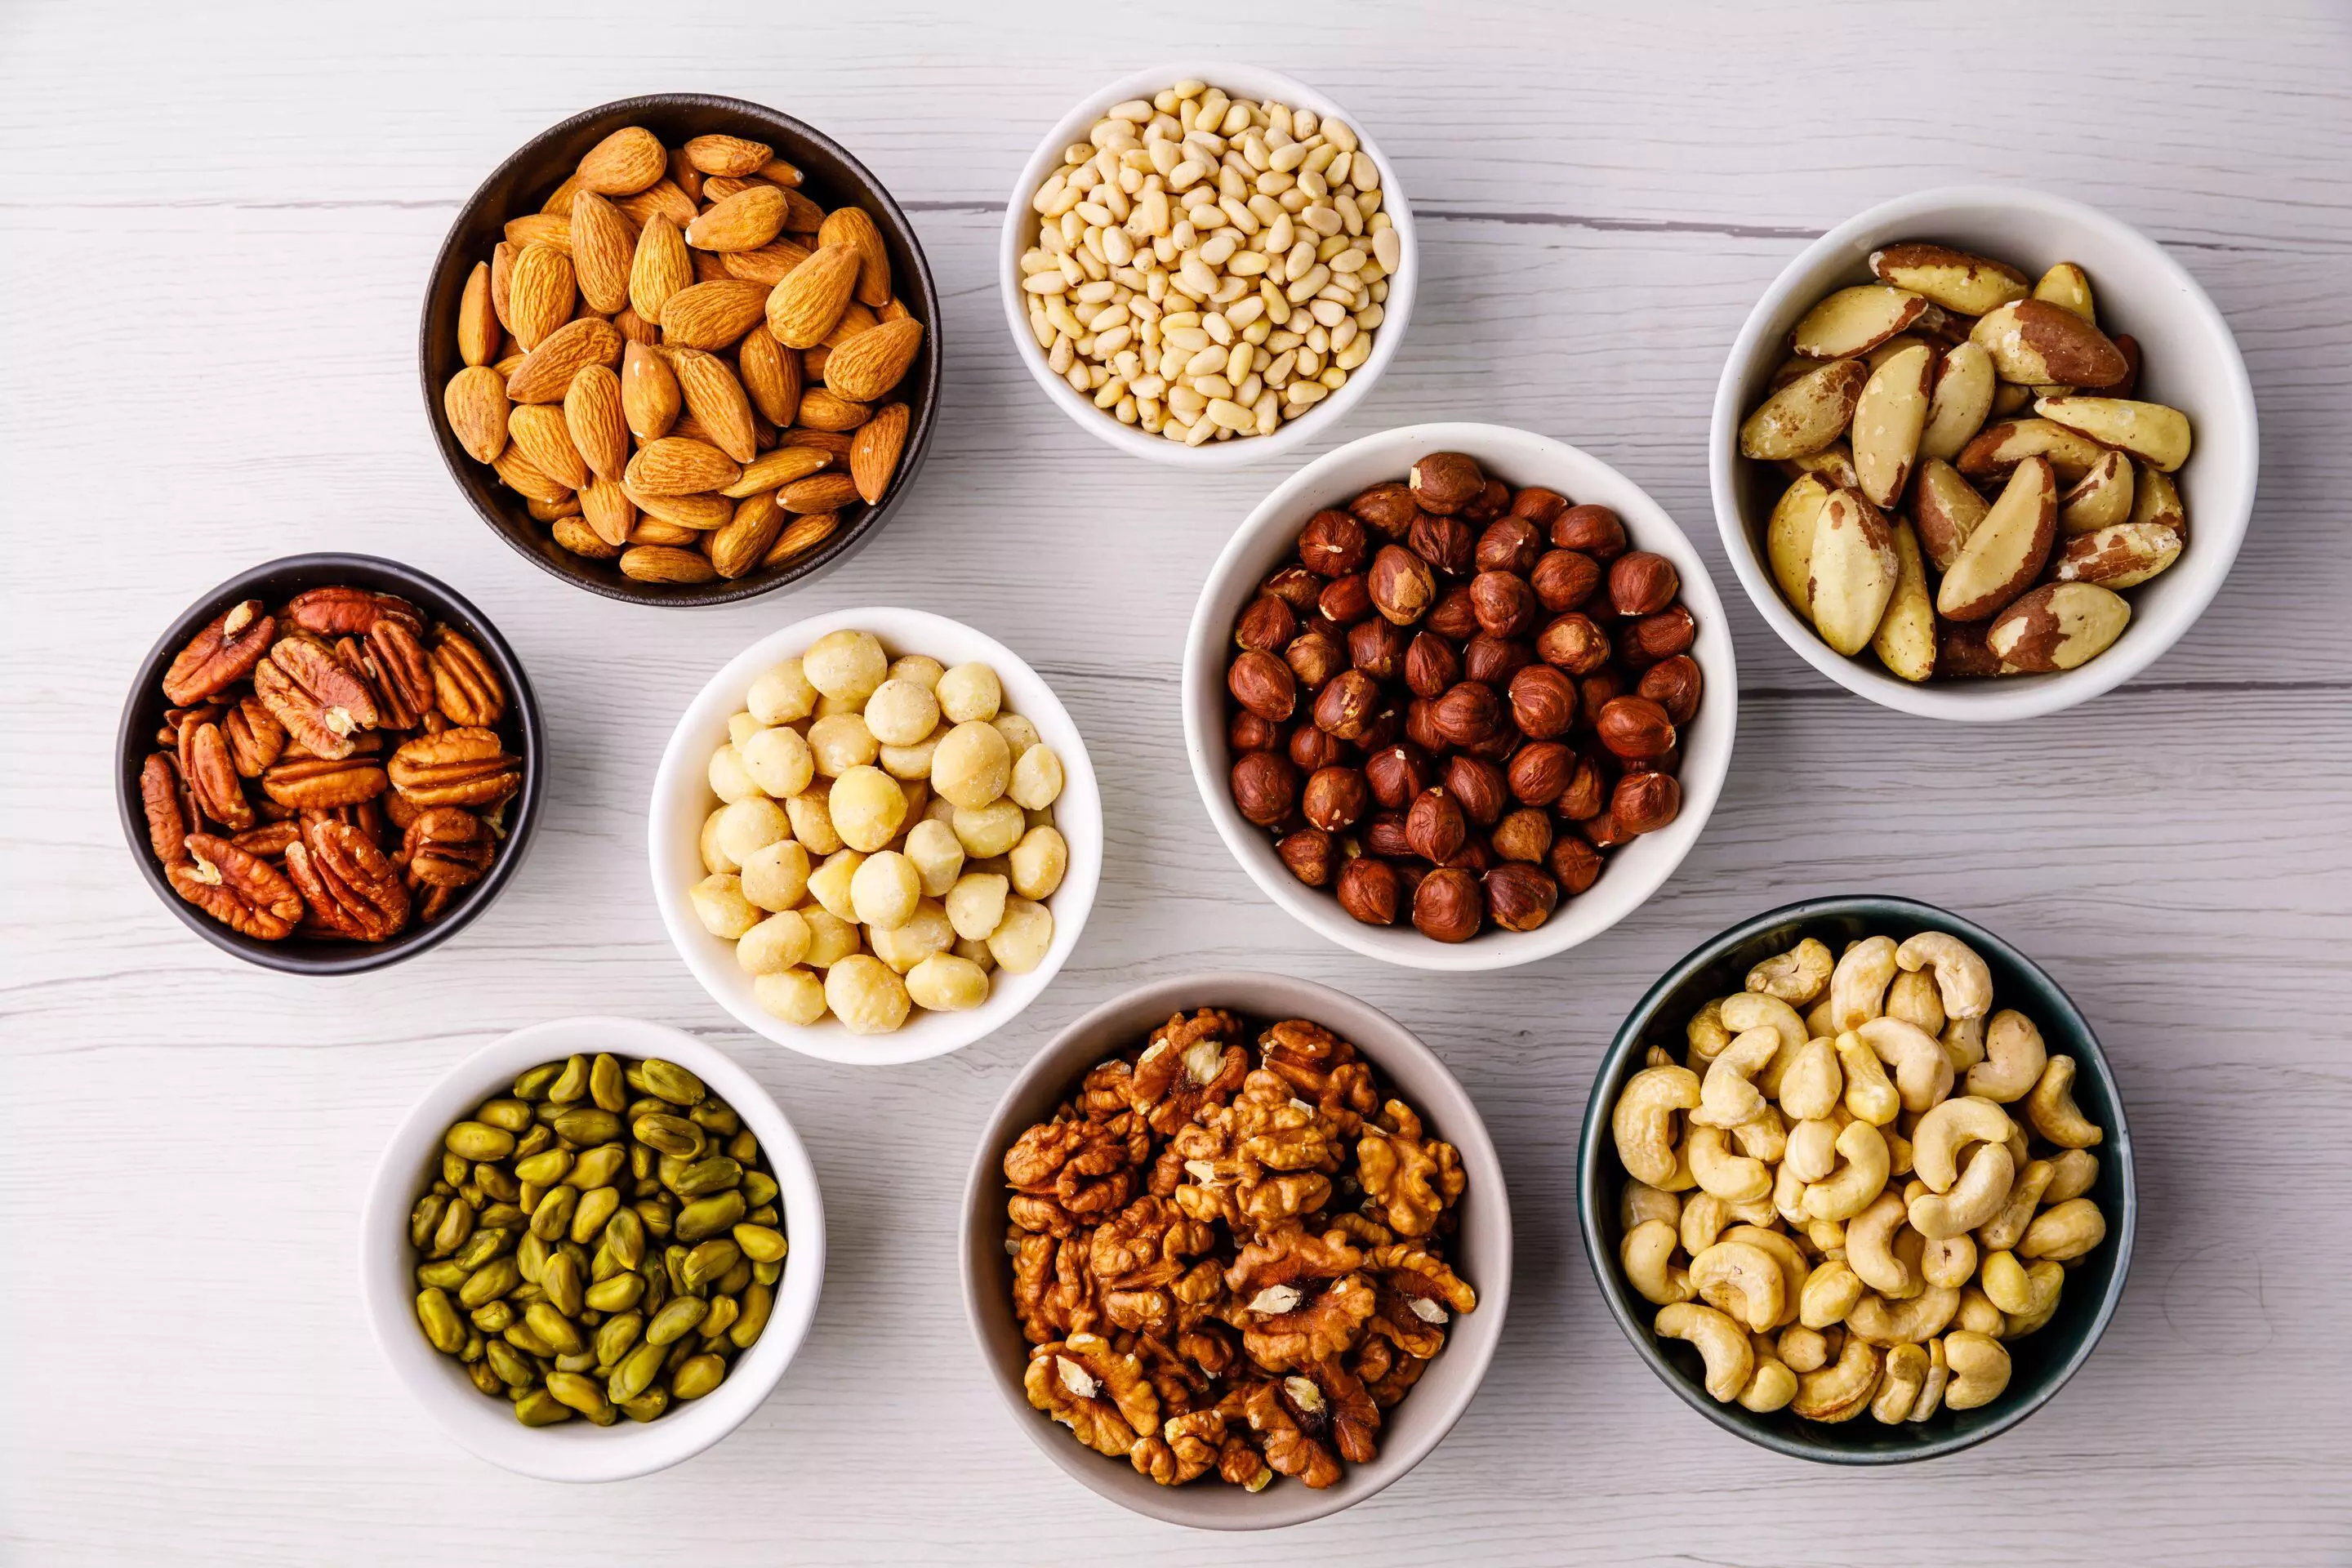 Consumption of Tree Nuts Improves Weight Loss and Satiety, Finds Study